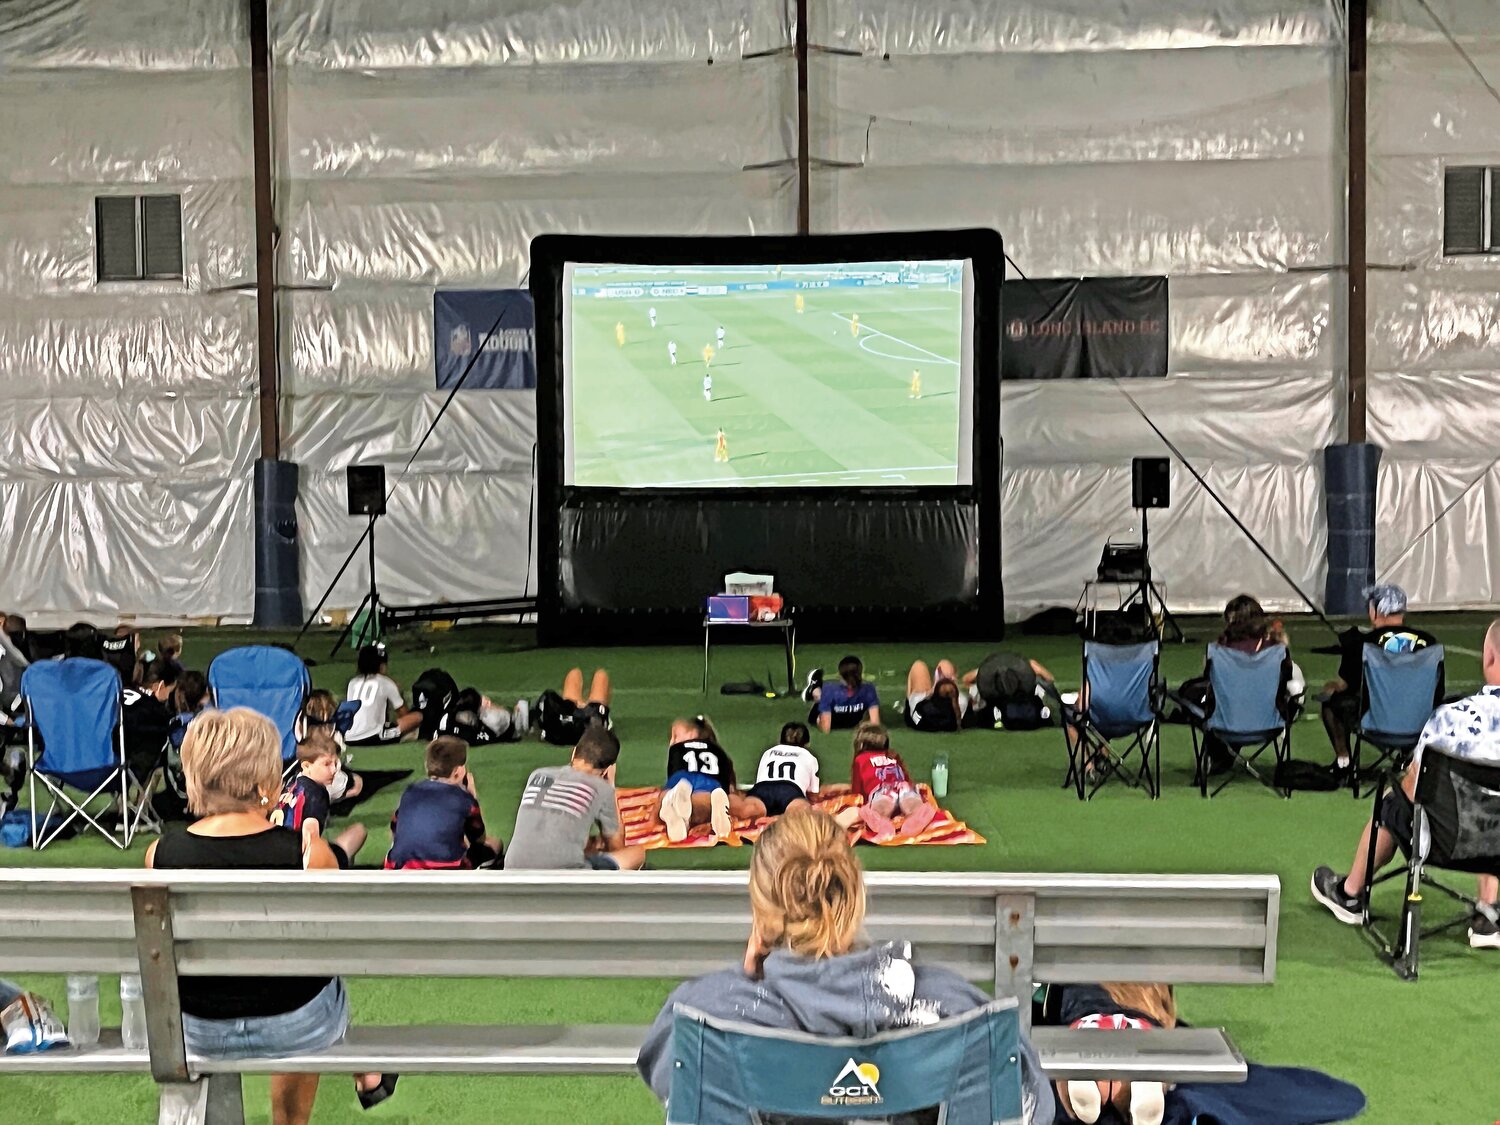 Patrons enjoy the World Cup game on the big screen provided by Nassau County Executive Bruce Blakeman’s office. It was all part of a watch party held at Globall Sports Center on Charles Lindbergh Boulevard.